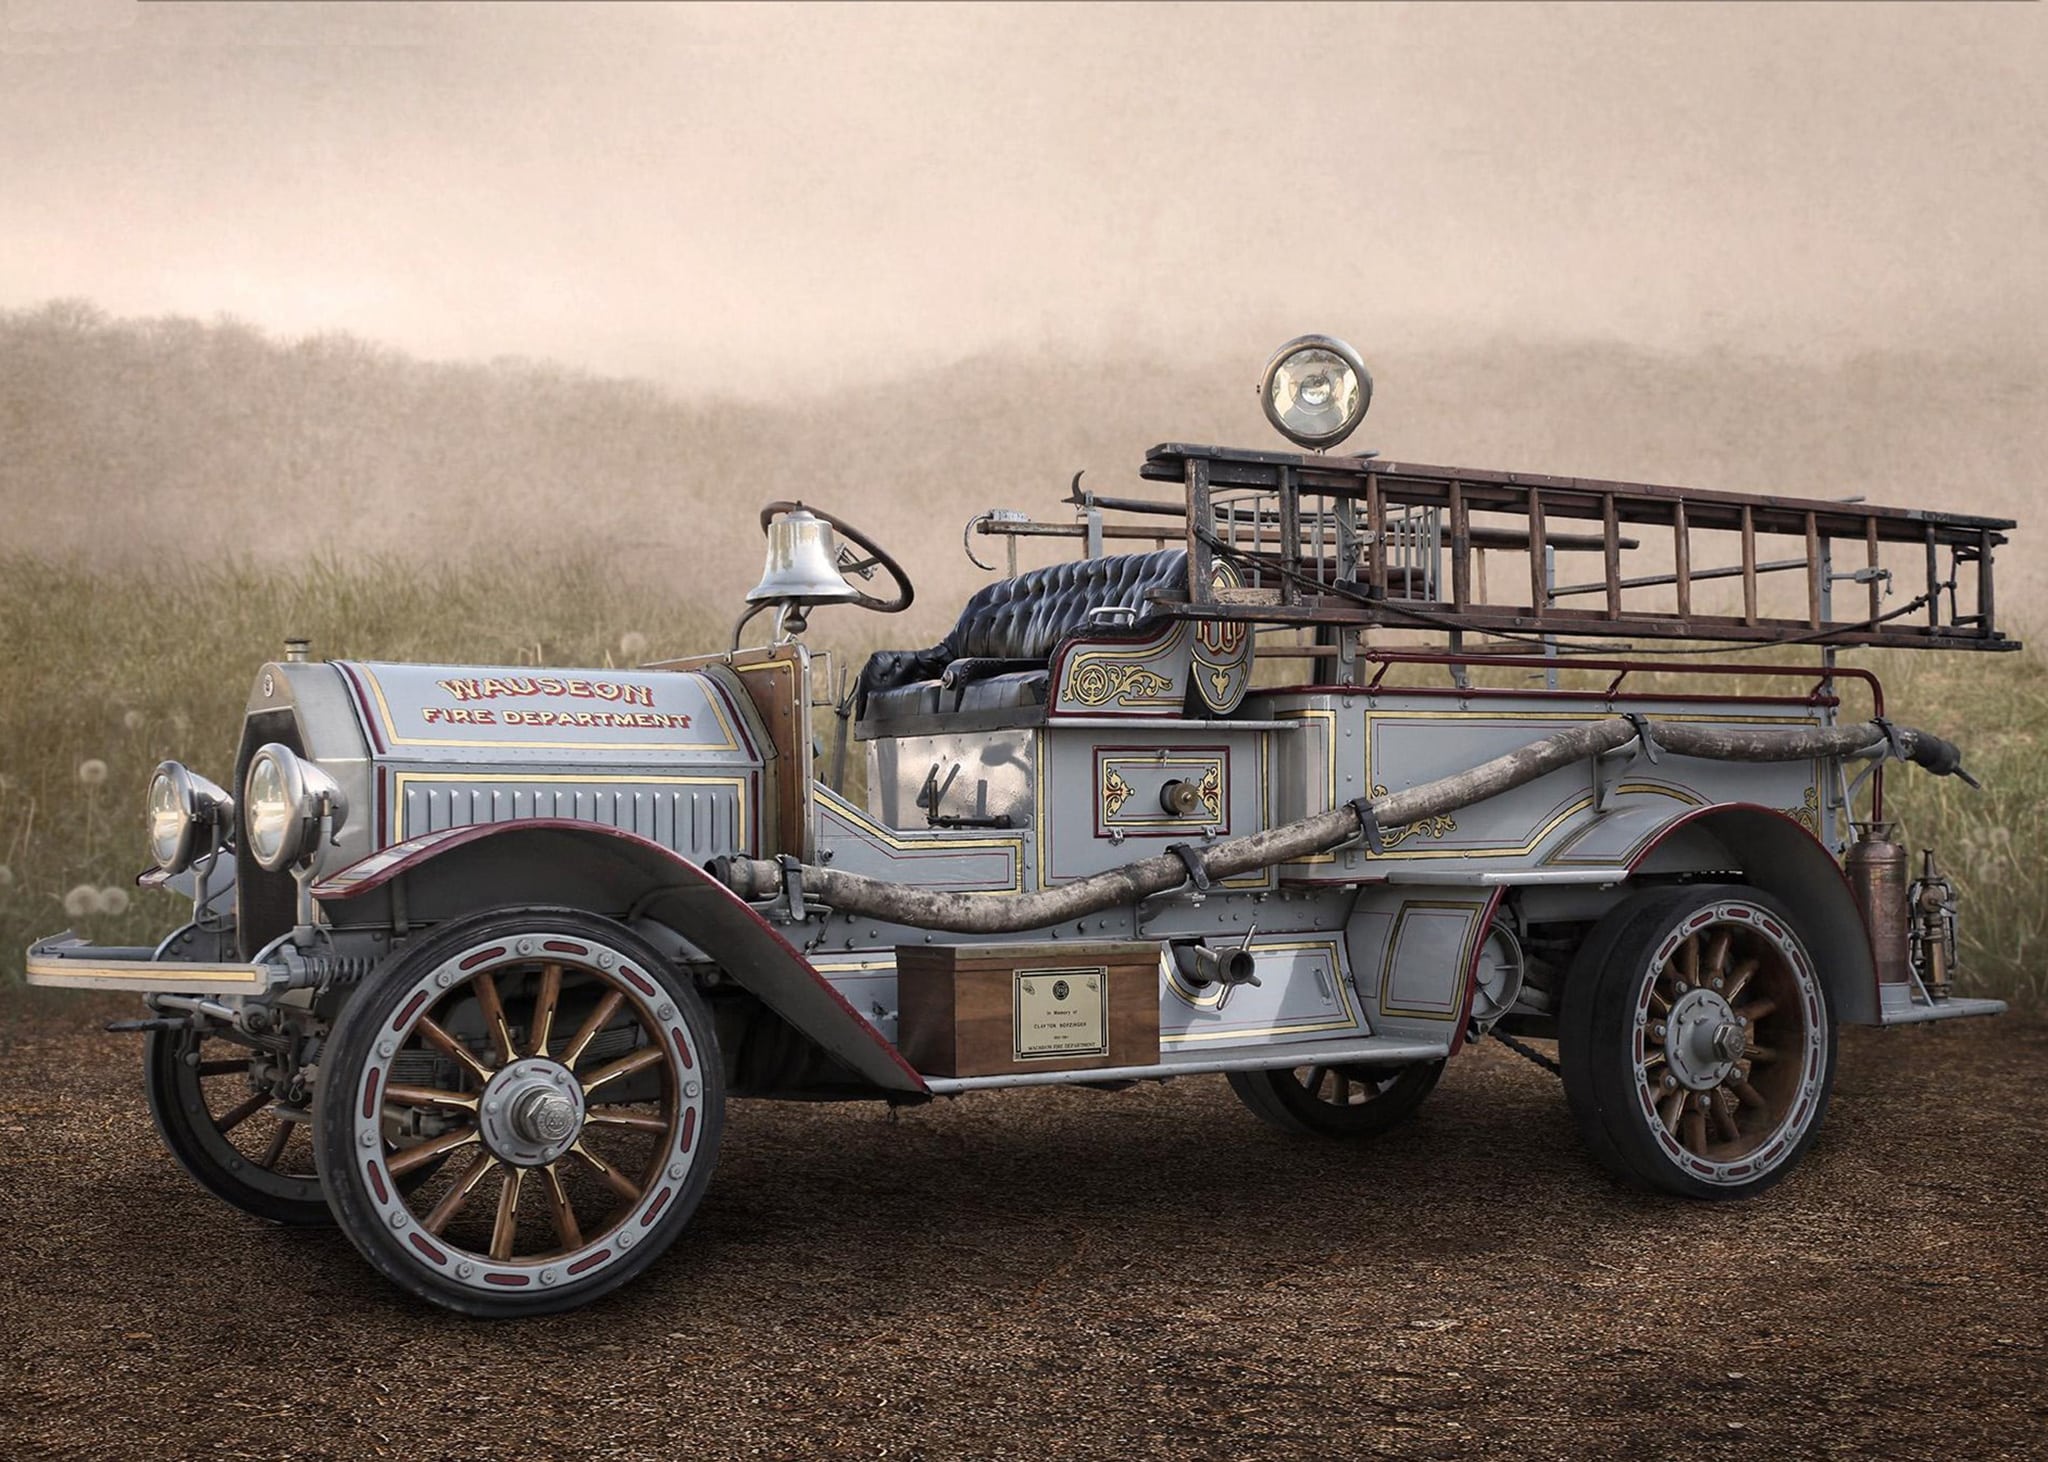 Antique 1916 Seagrave pumper parked in a field